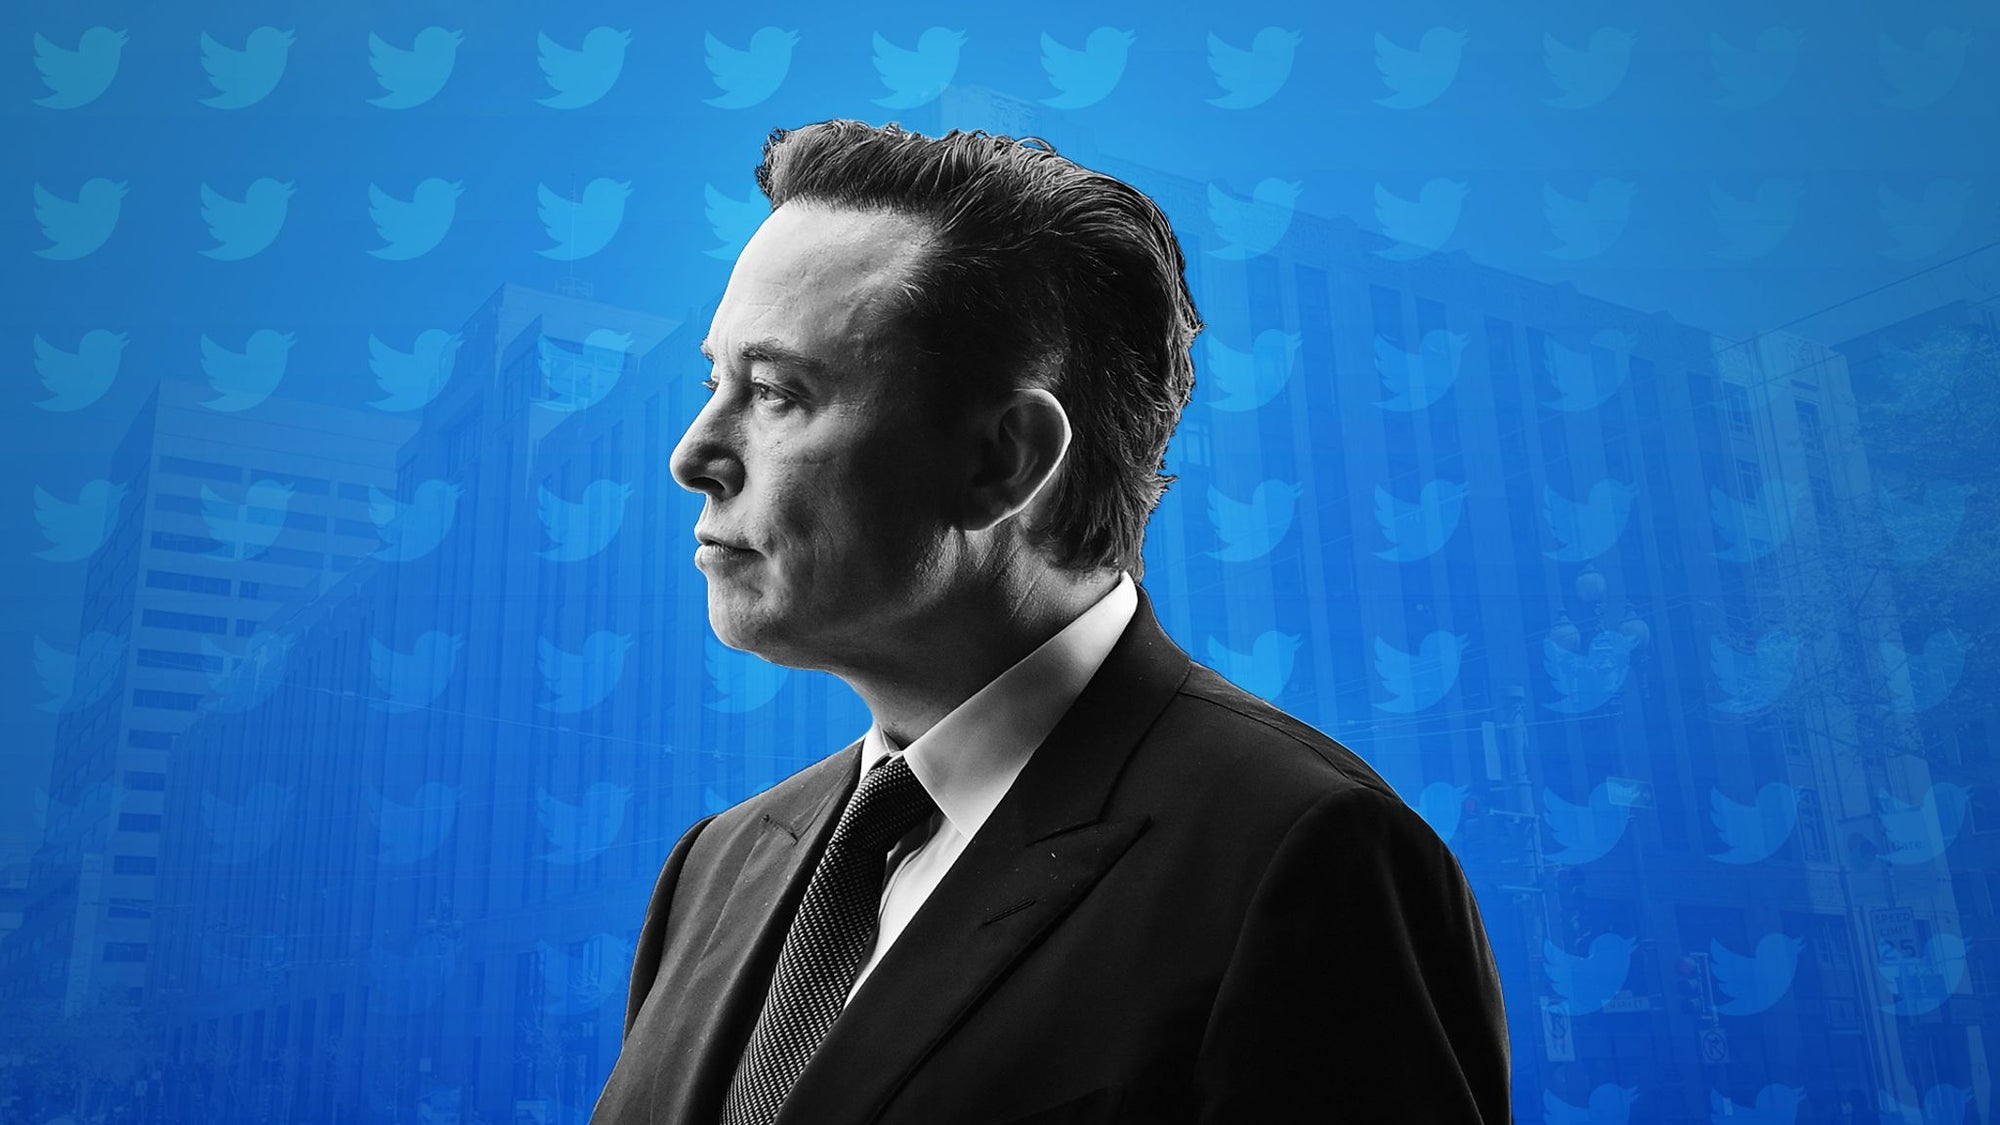 Elon Musk's Twitter reign got us wondering: Will we be able benefit from his genius on the social media platform?